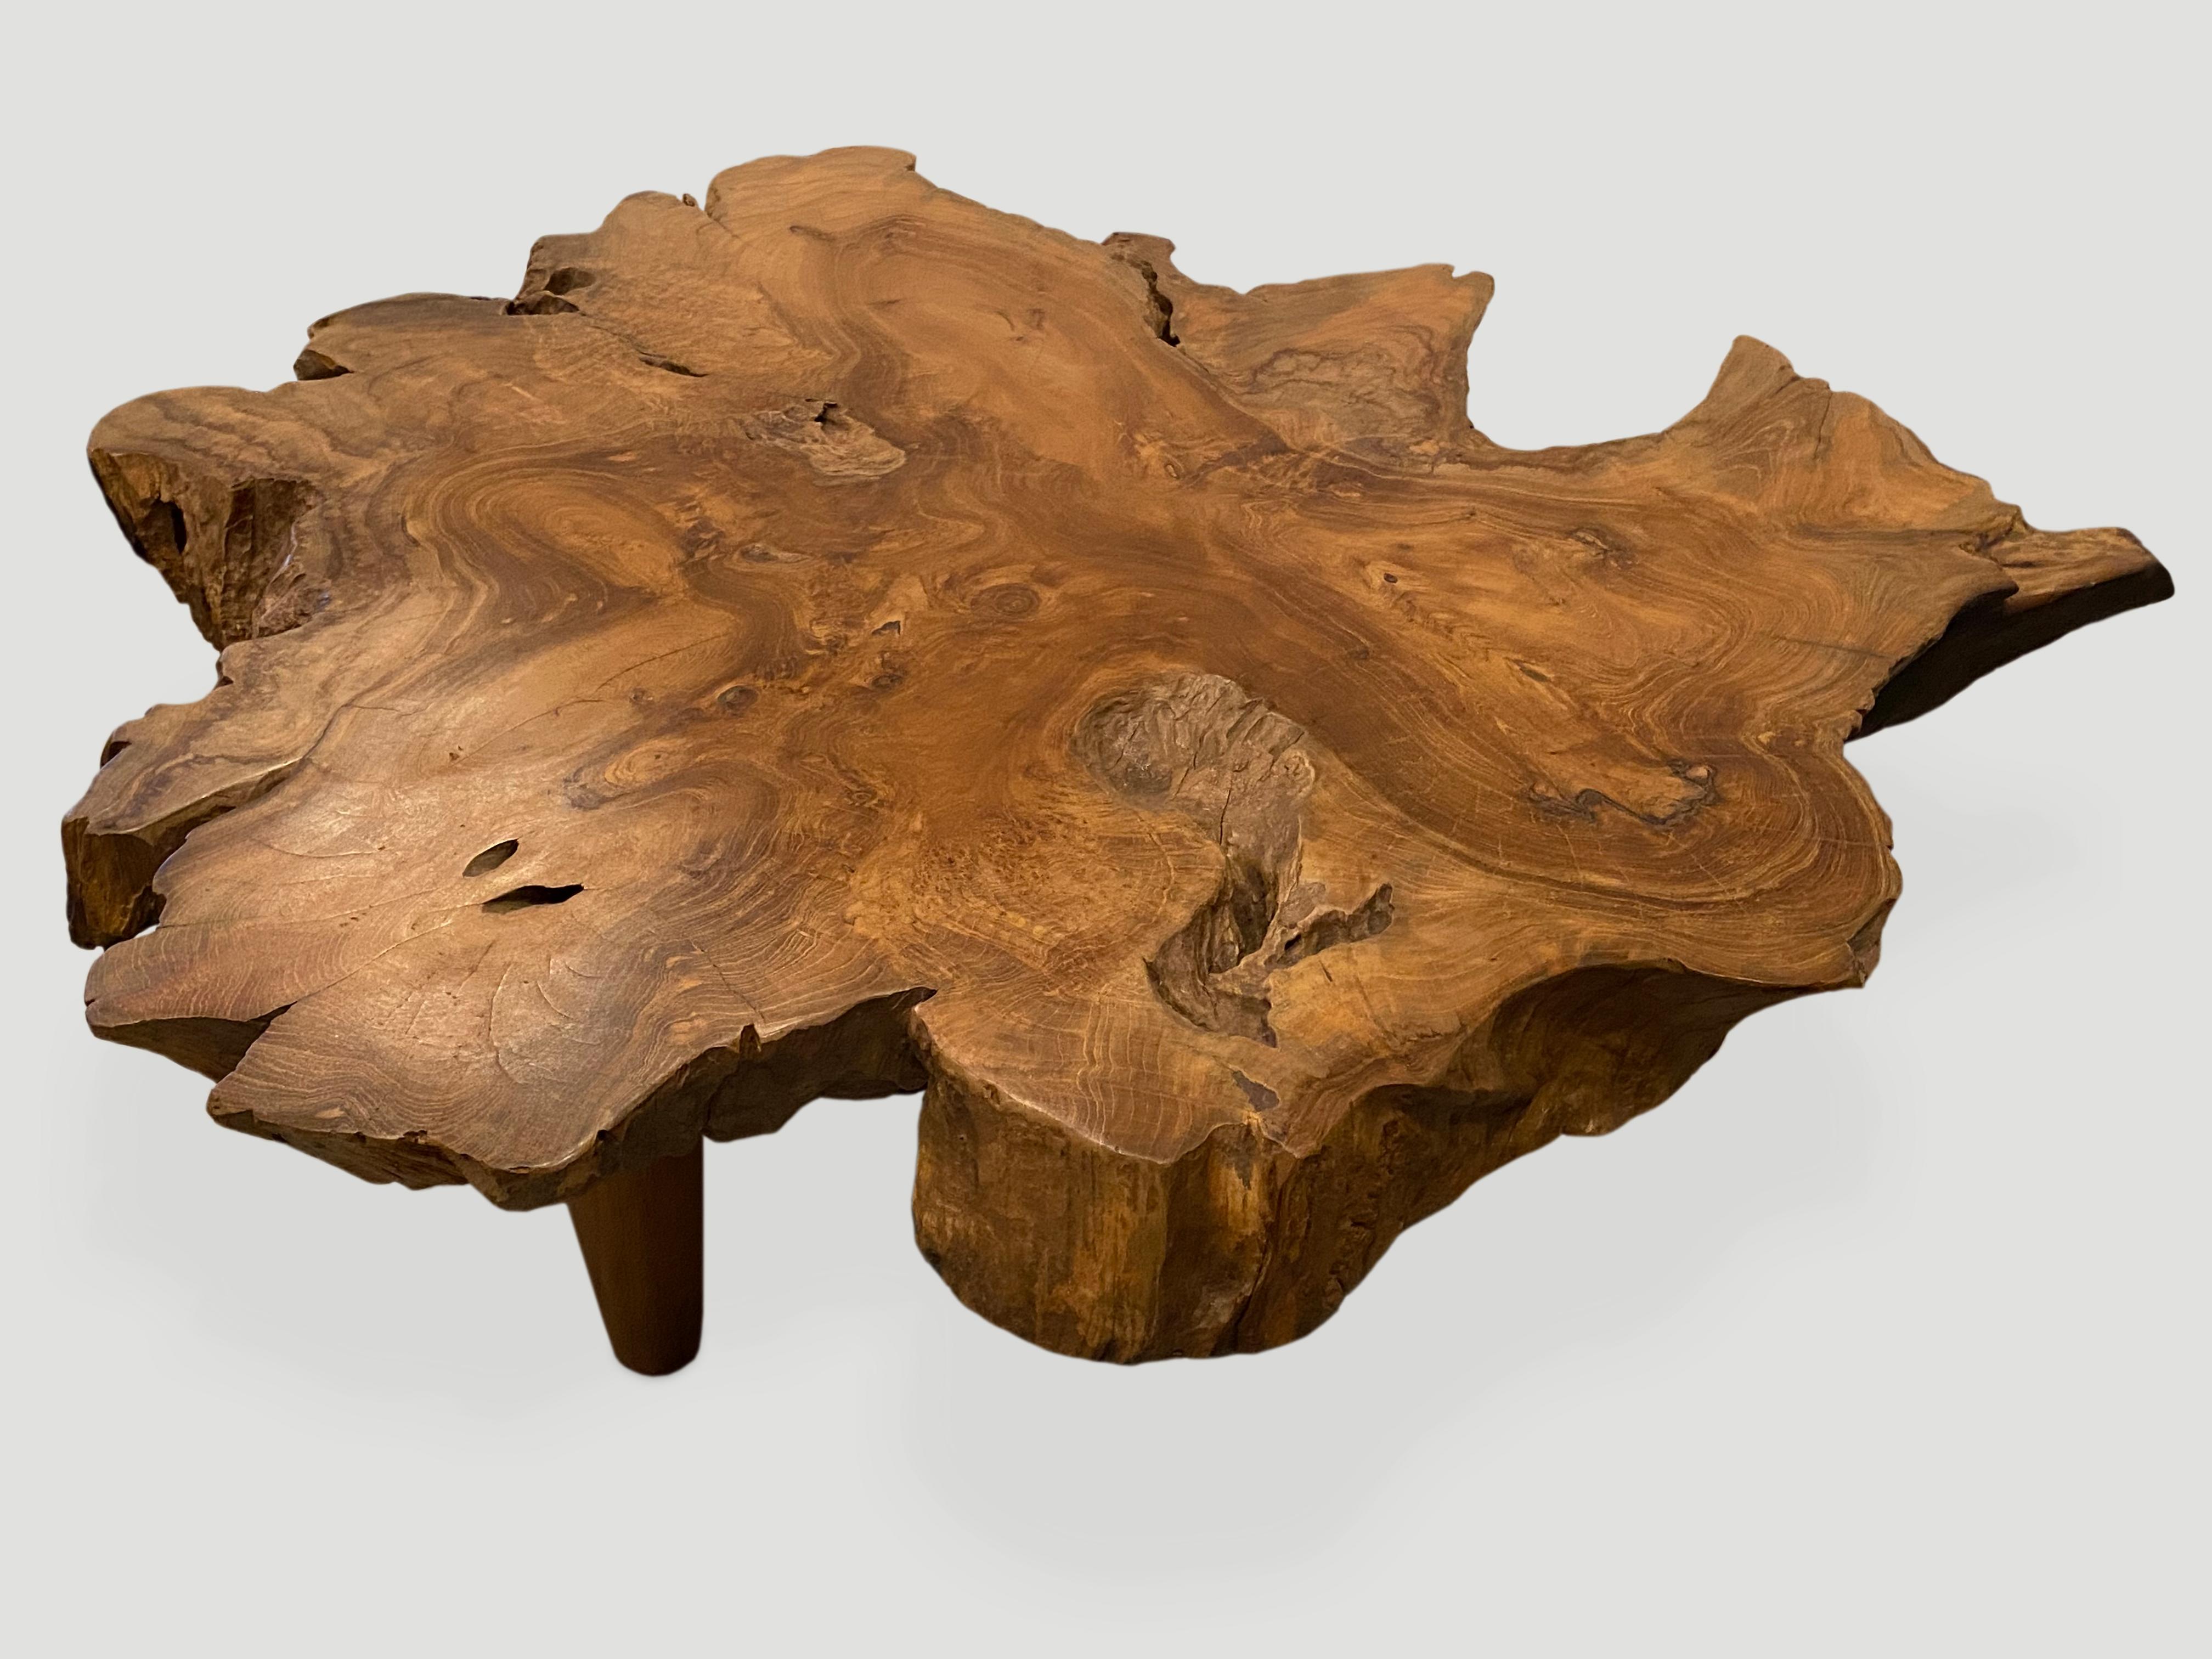 Reclaimed teak single slab coffee table with a natural oil finish. Floating on midcentury style legs. Organic with a twist.

Own an Andrianna Shamaris original.

Andrianna Shamaris. The Leader In Modern Organic Design™.